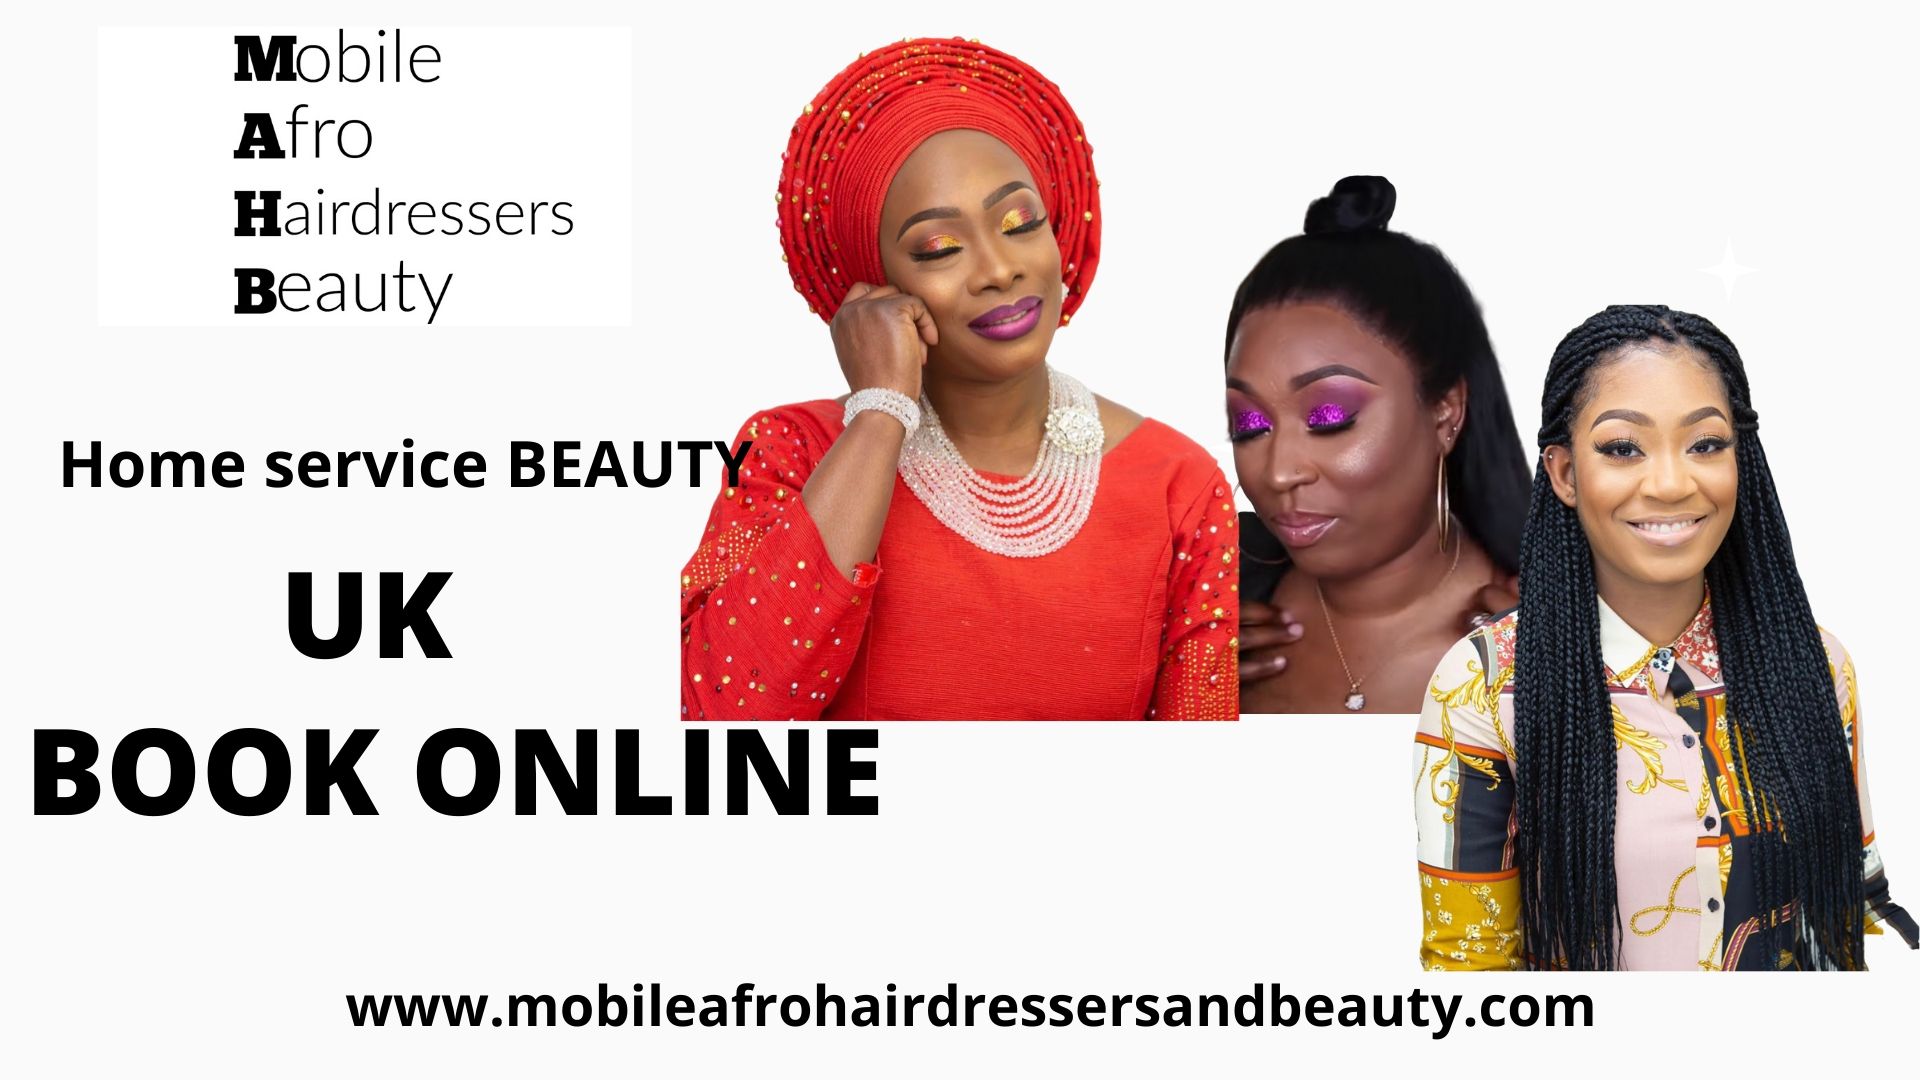 UNITED KINGDOM NO 1 MOBILE AFRO BEAUTY PLATFORM FOR HAIRDRESSERS, MAKEUP ARTIST AND BEAUTICIANS